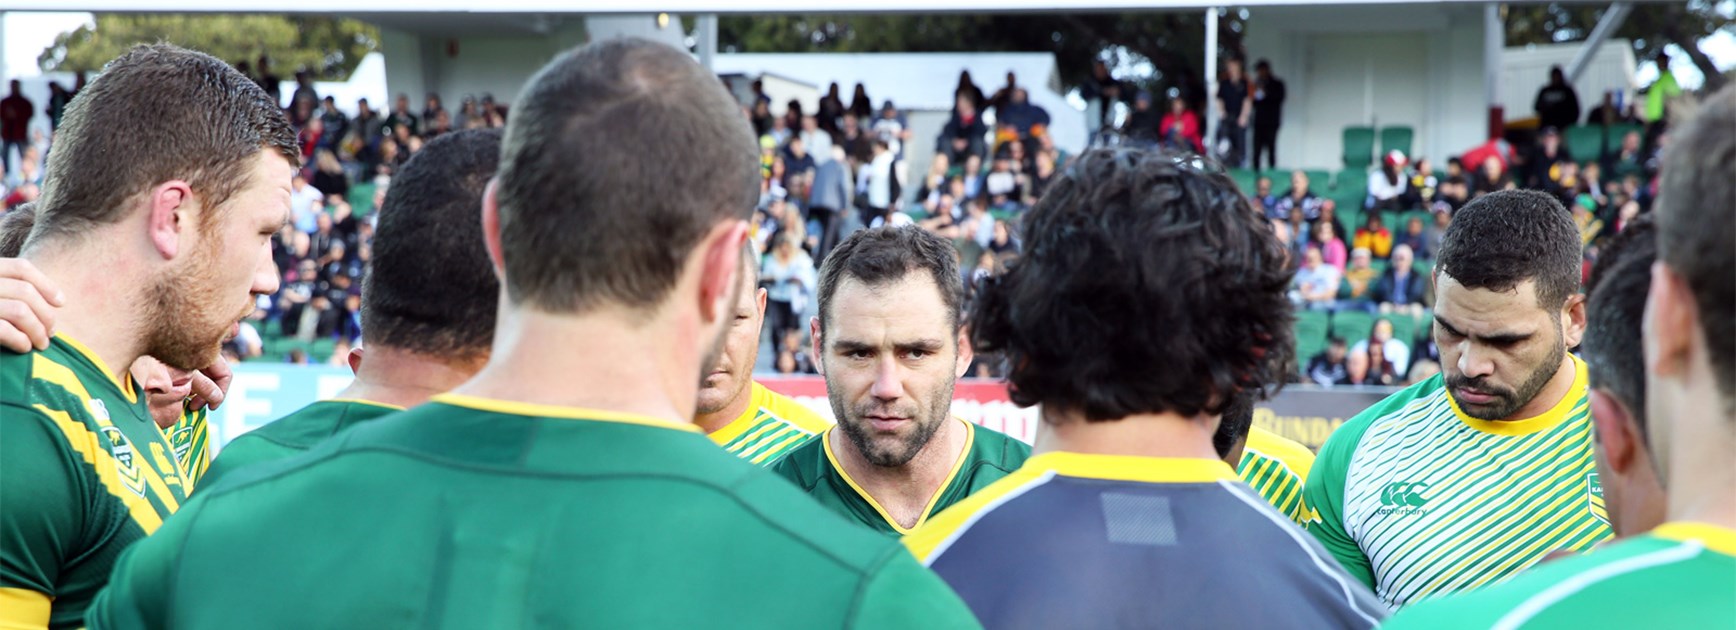 Cameron Smith address the Kangaroos ahead of Australia's clash with New Zealand in Perth.